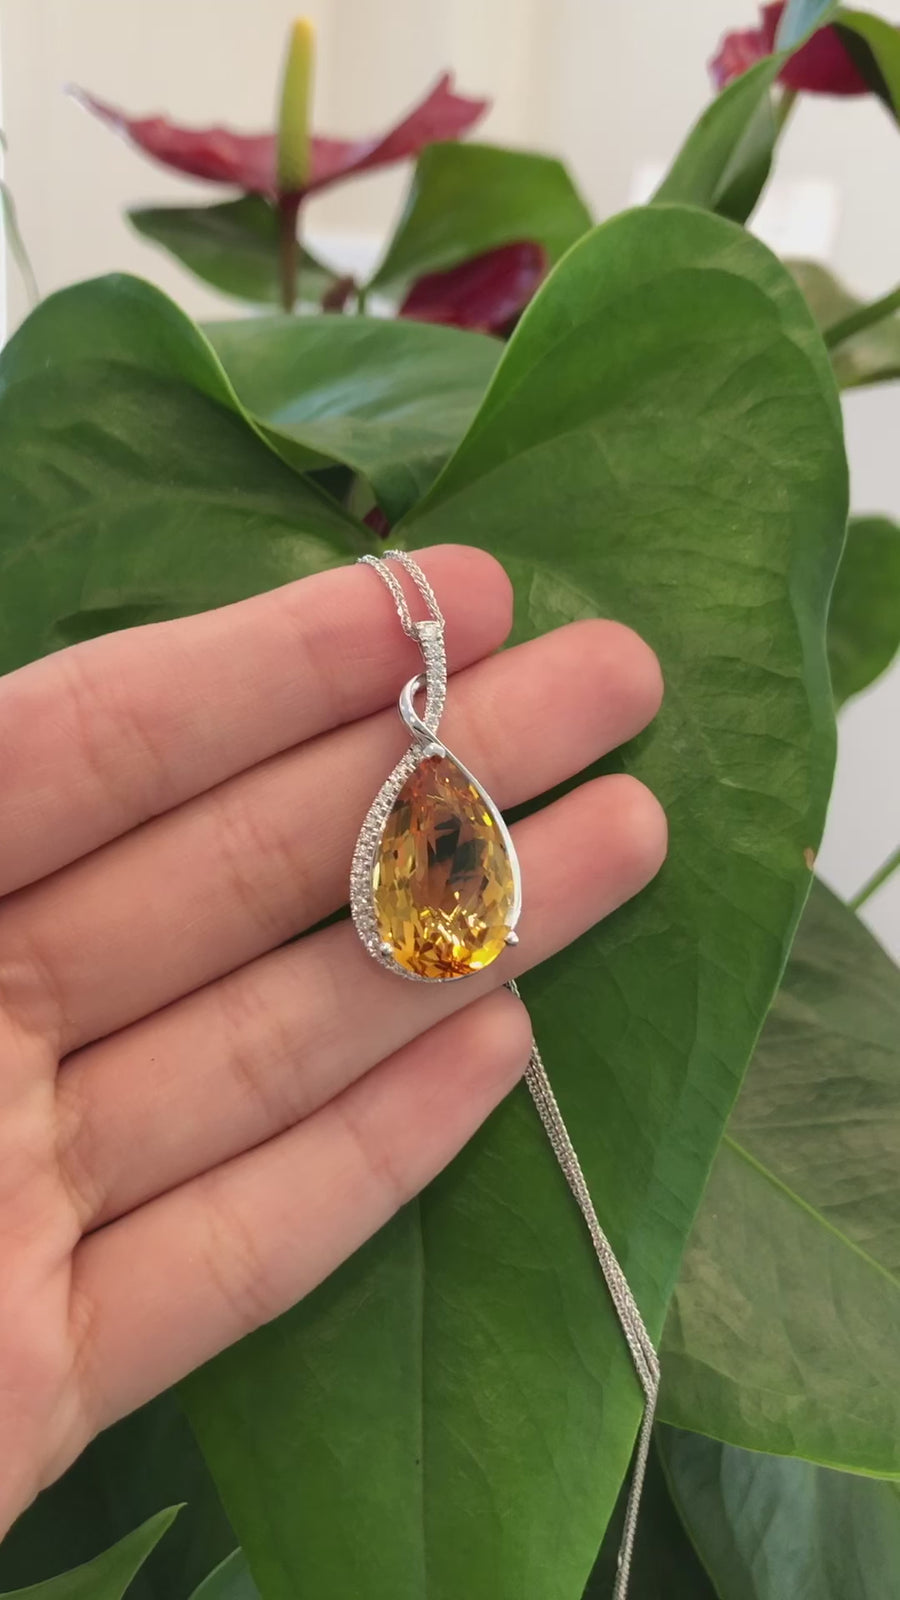 14k White Gold AAA Citrine Tear Drop Necklace with Diamonds